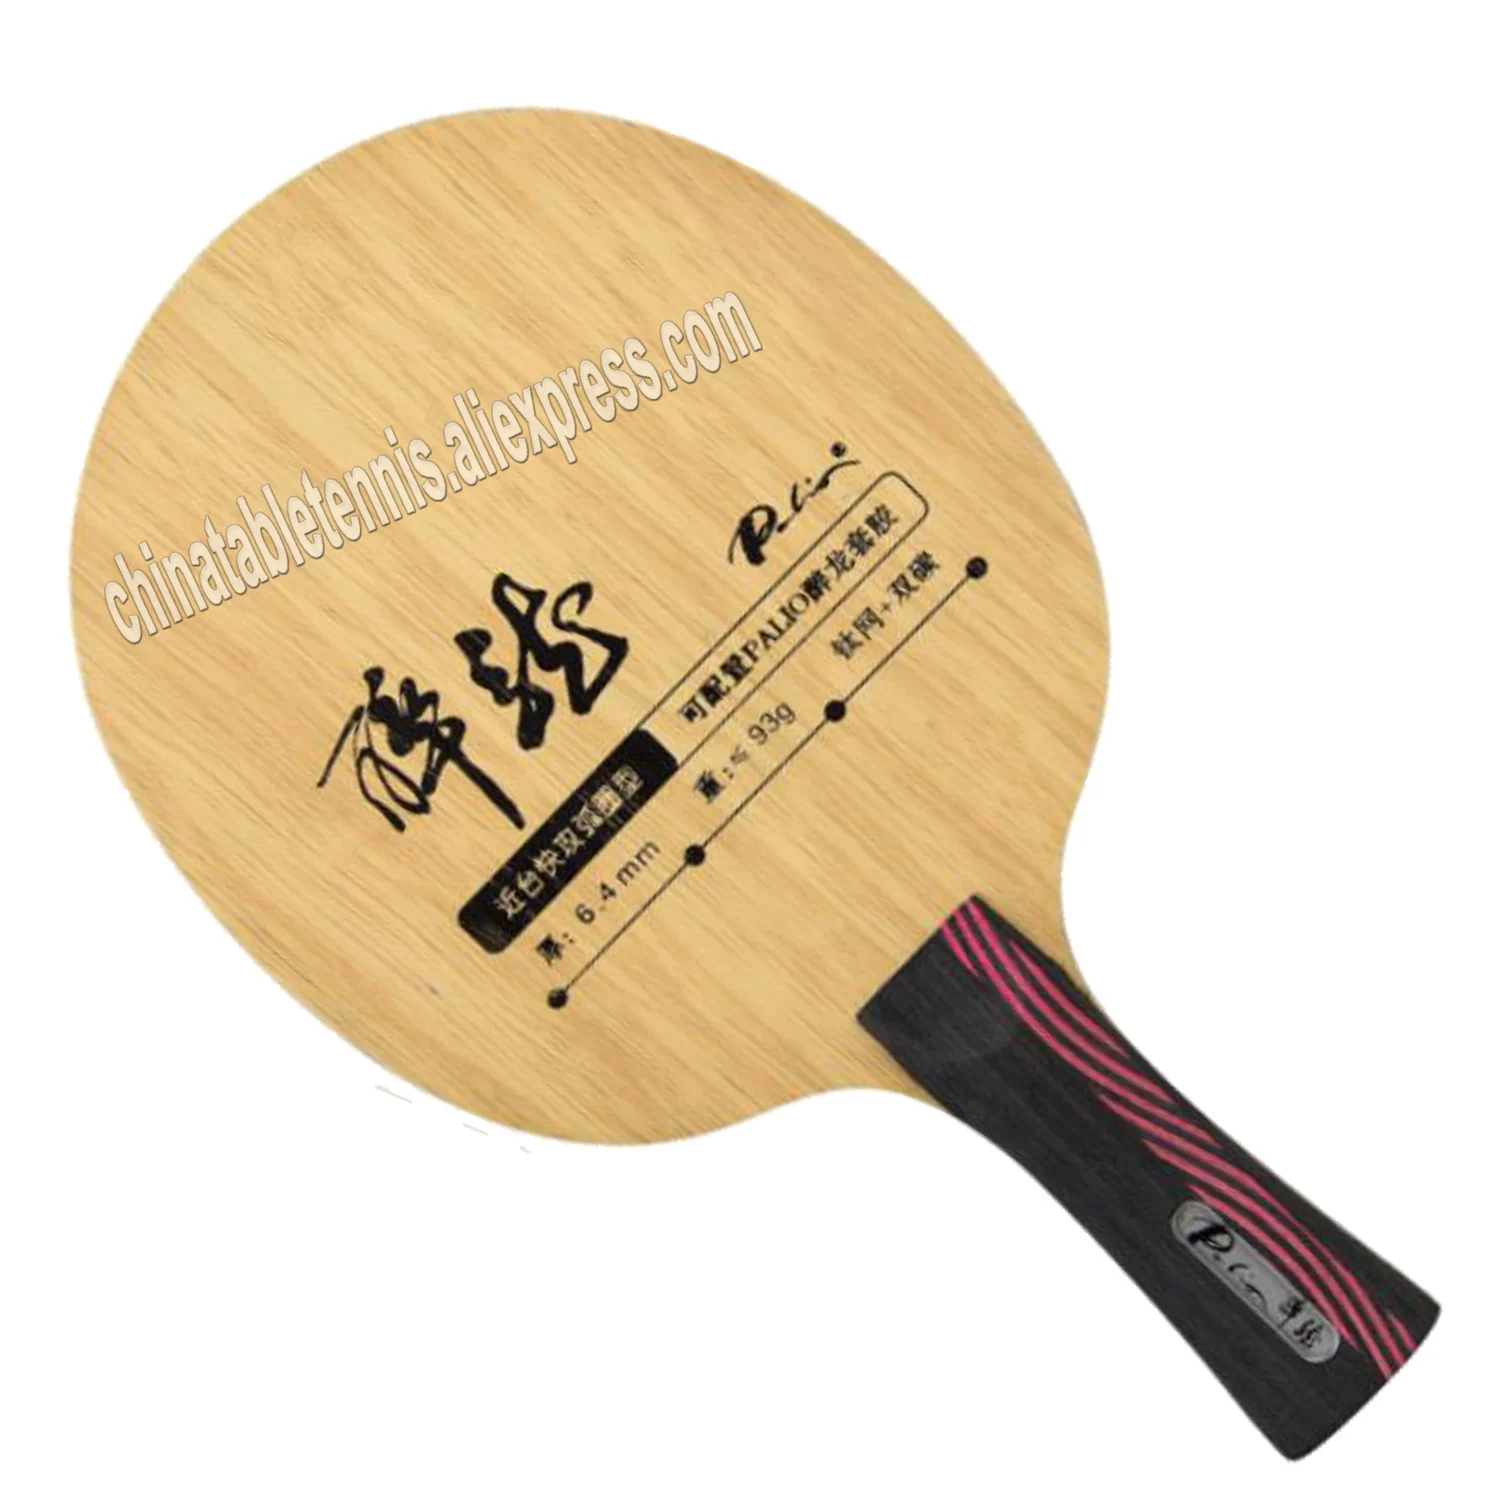 

Original Palio Drunk dragon titanium mesh+ double carbon table tennis blade for fast attack with loop neat table